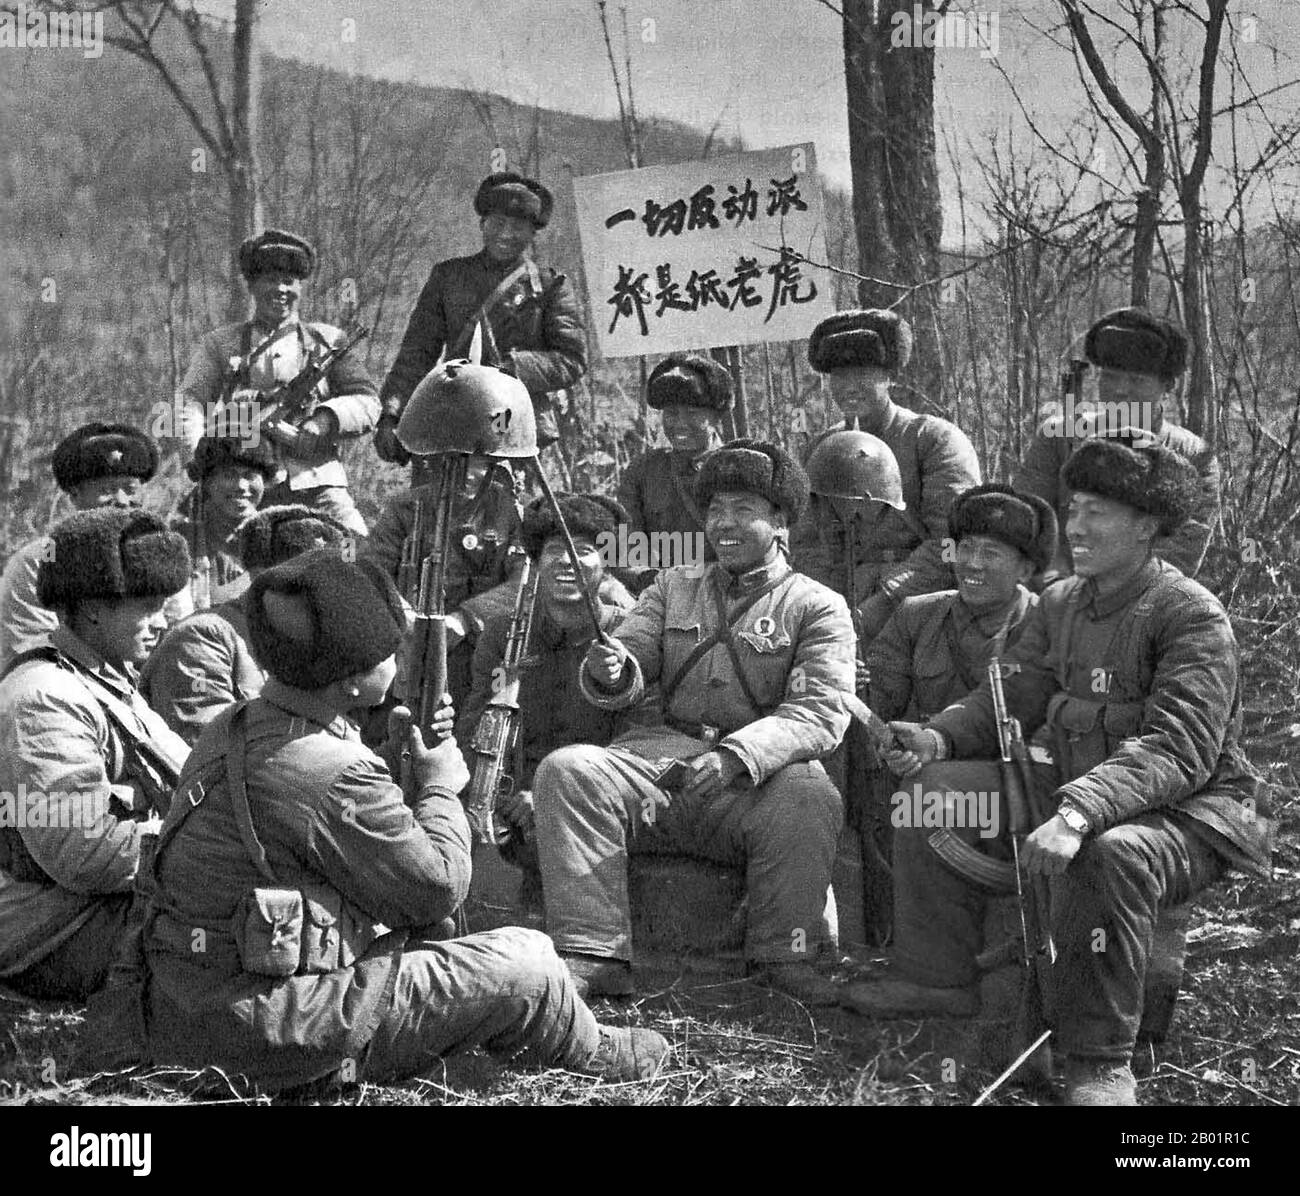 China: Chinese troops on disputed Chenpoo Island hold up Soviet helmets on their bayonet points, 1969.  Down with the New Tsars!: Soviet Revisionists’ Anti-China Atrocities on the Heilung and Wusuli Rivers.  By March 1969, Sino-Russian border rivalries led to the Sino-Soviet border conflict at the Ussuri River and on Damansky-Zhenbao Island; more small-scale warfare occurred at Tielieketi in August. Stock Photo